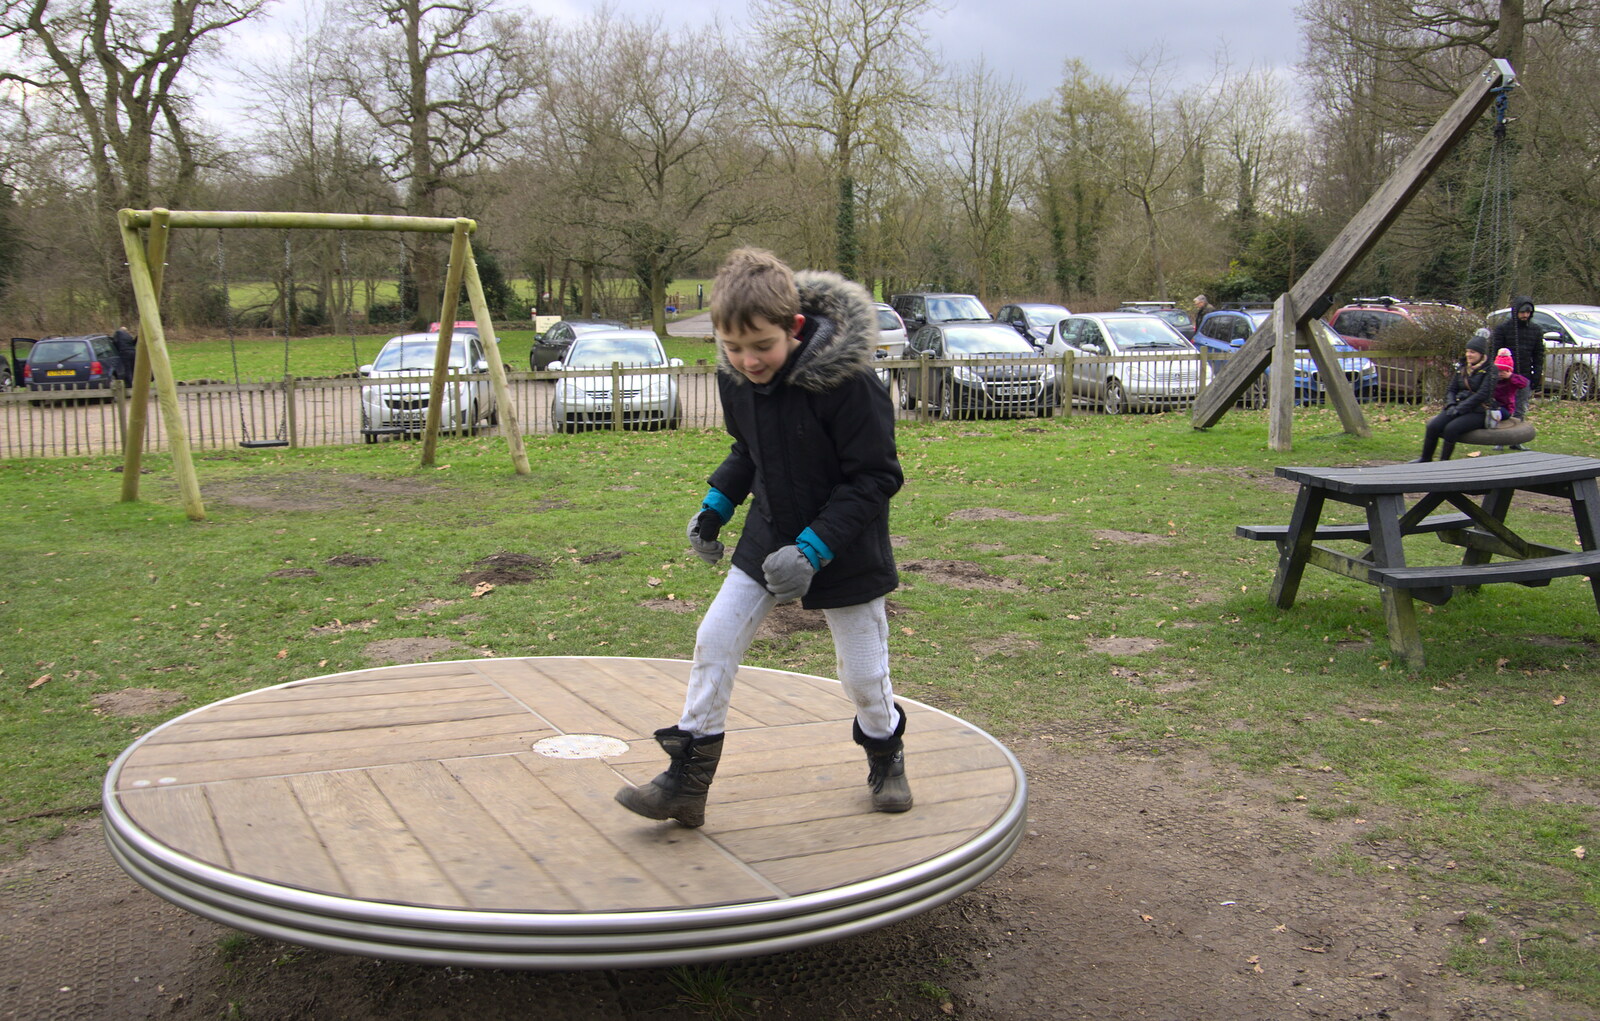 Fred spins the roundabout from A Return to Thornham Walks, Suffolk - 4th February 2018